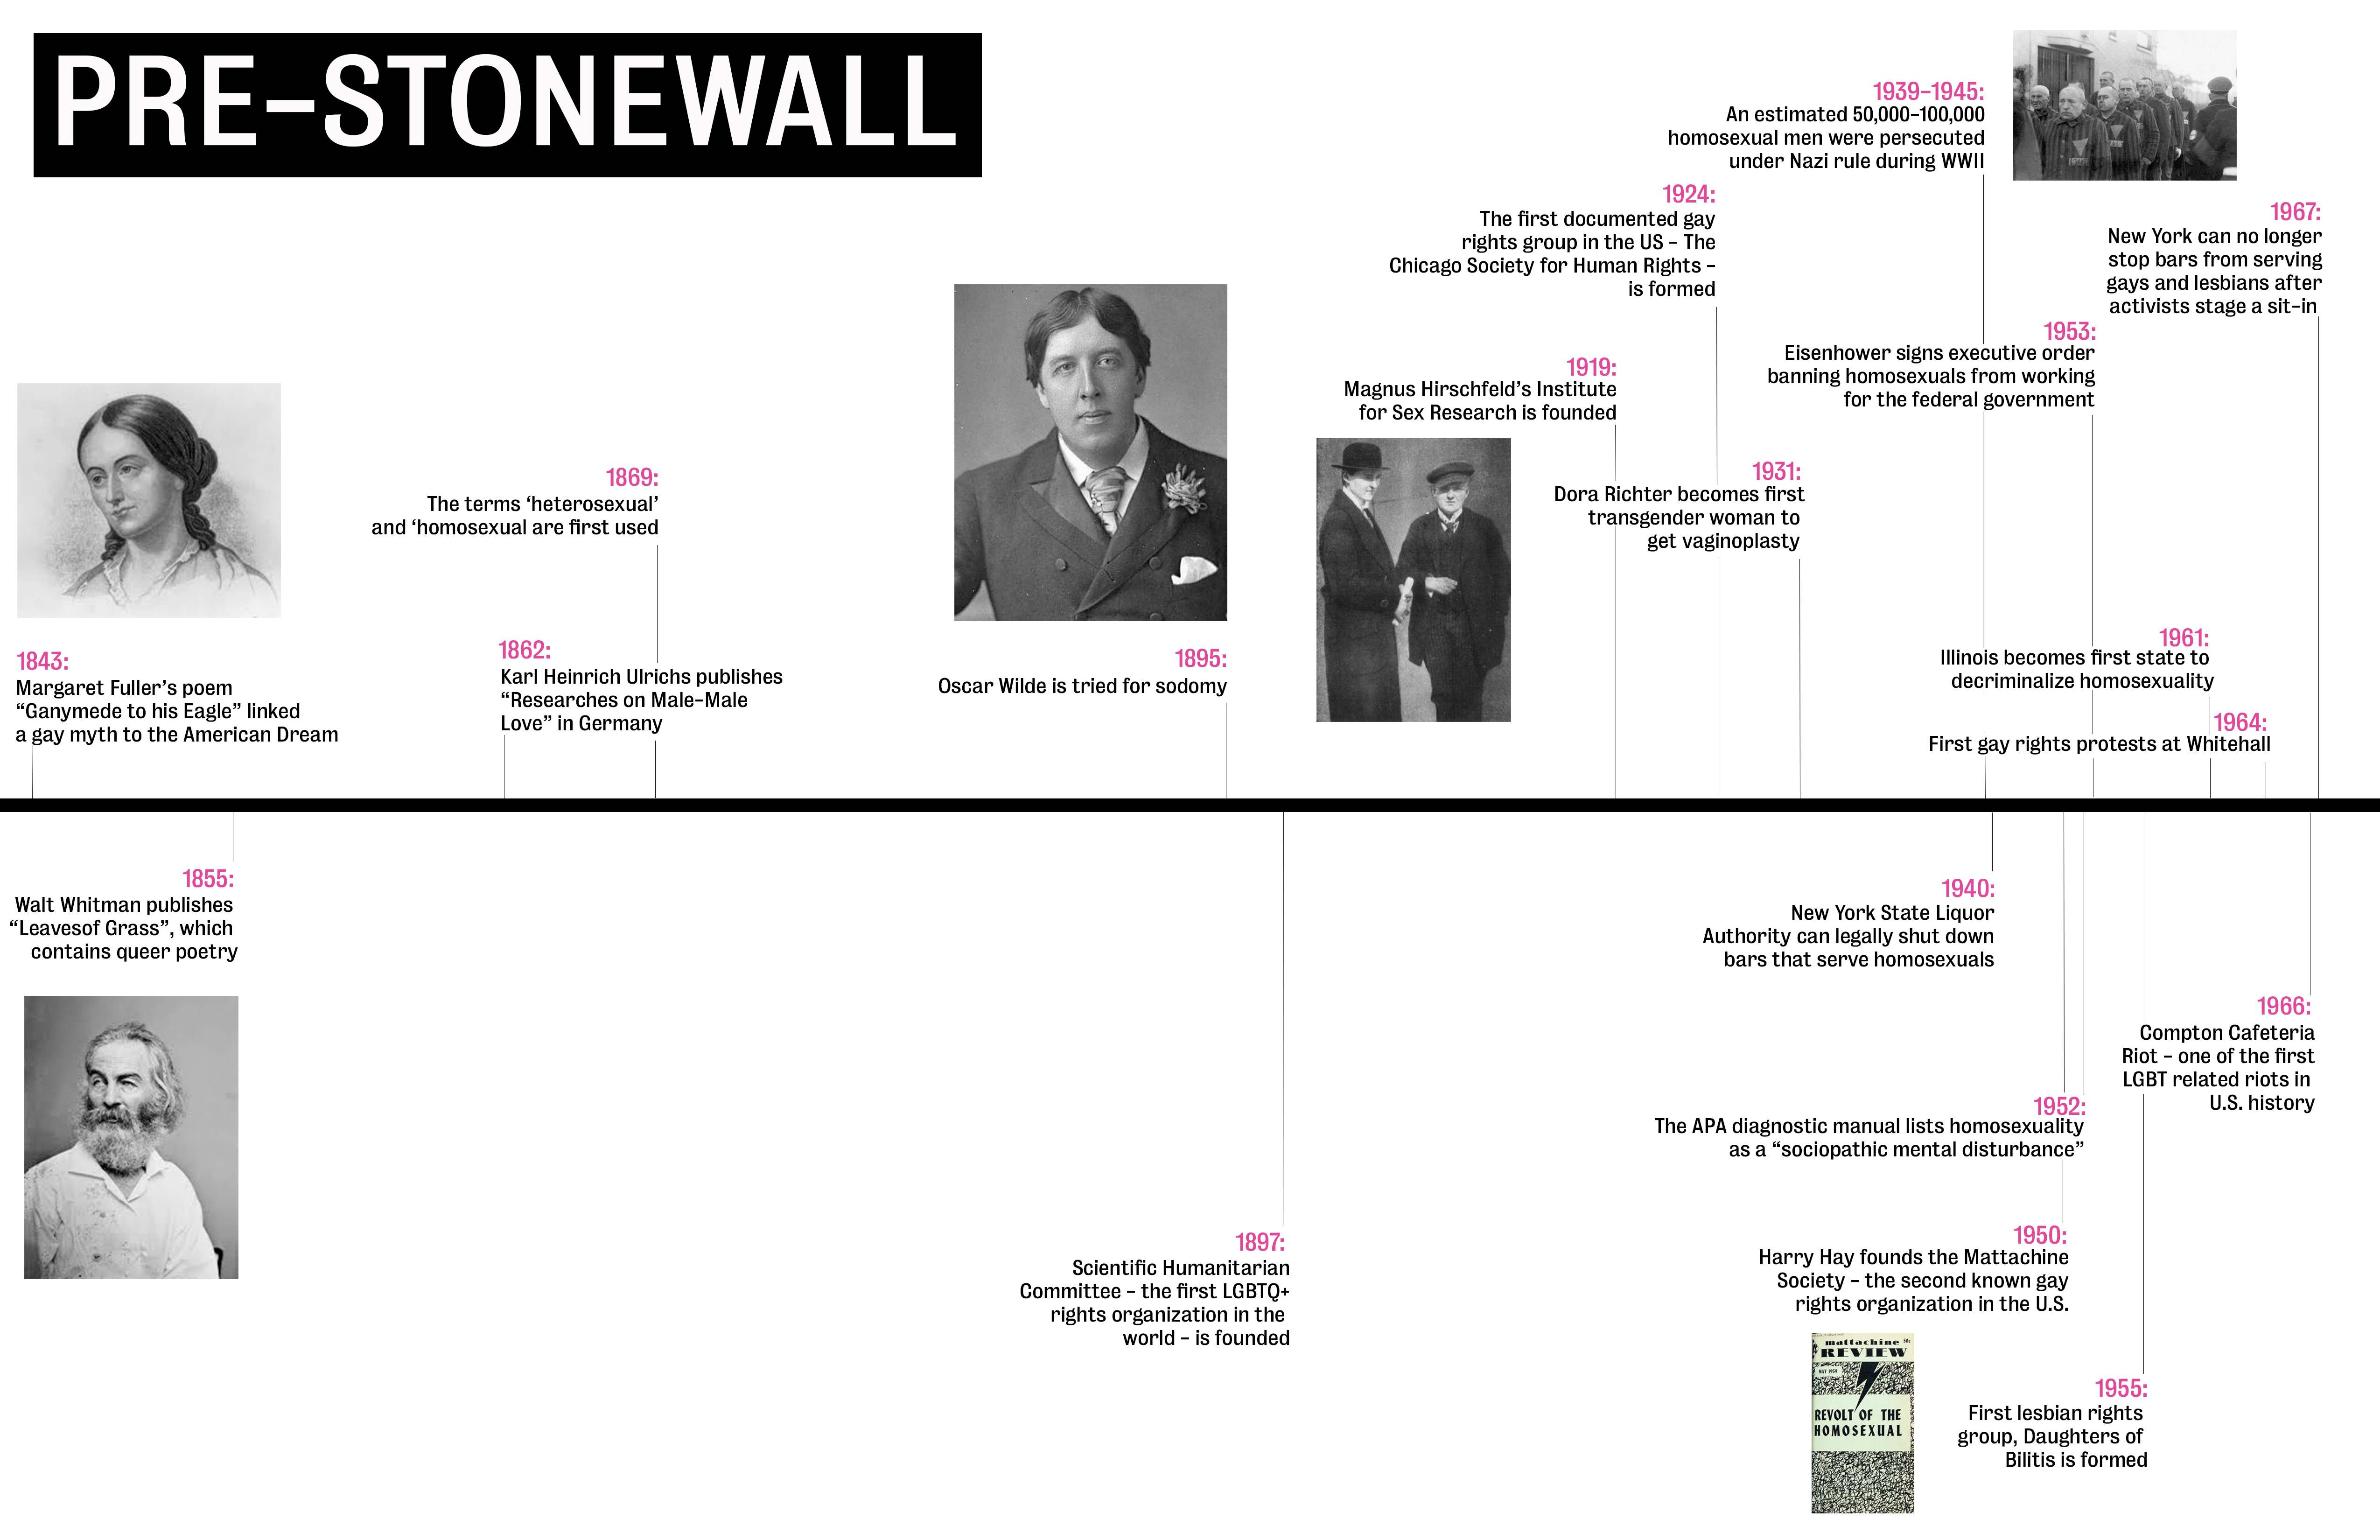 Timeline of LGBTQ events pre-Stonewall